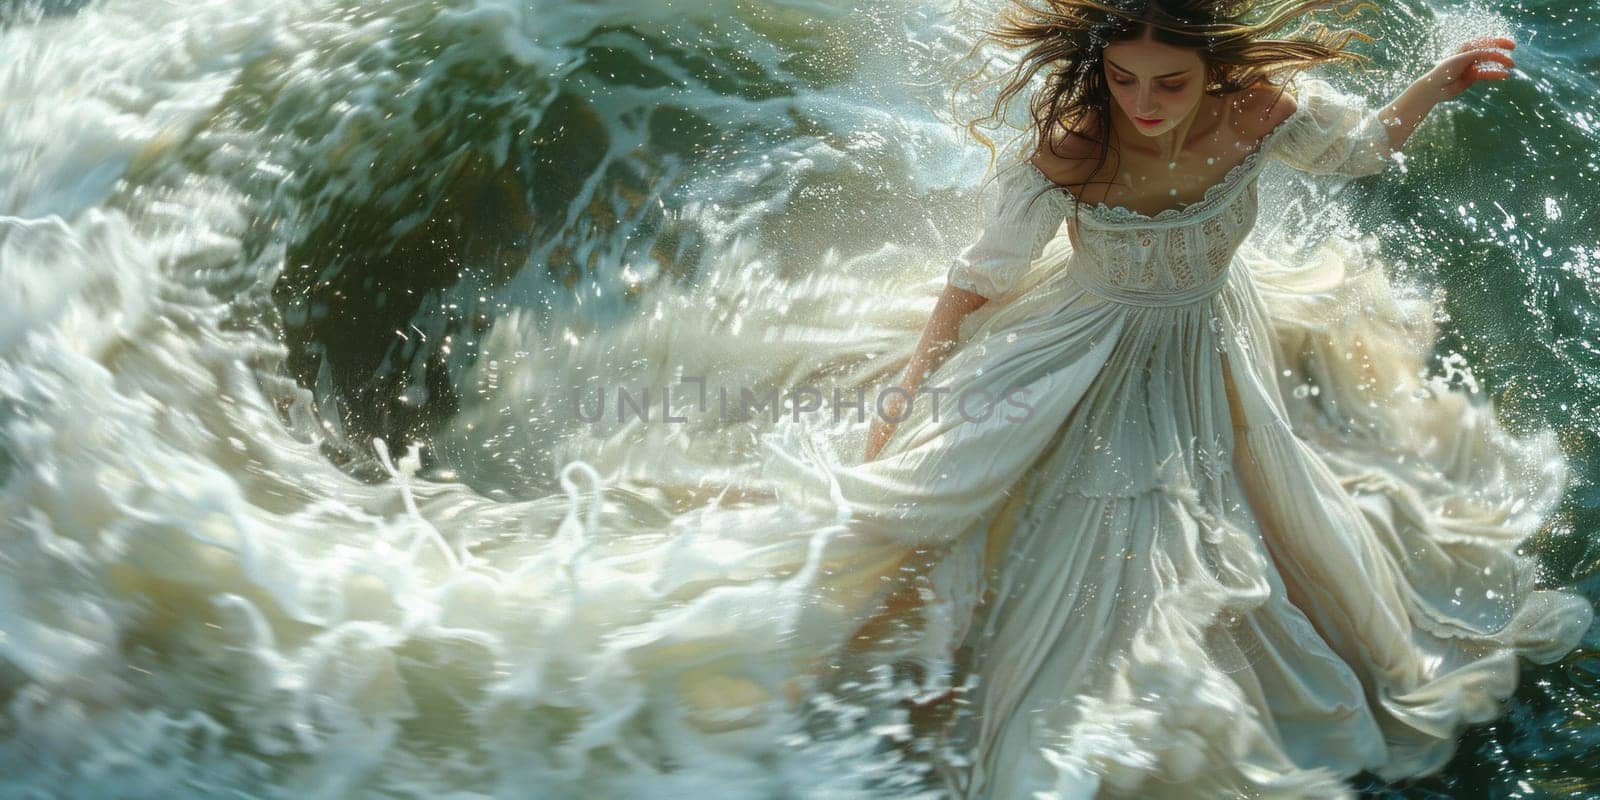 A breathtaking painting of a woman in a flowing dress, standing gracefully amidst a tranquil water setting, embodying serenity and elegance by but_photo